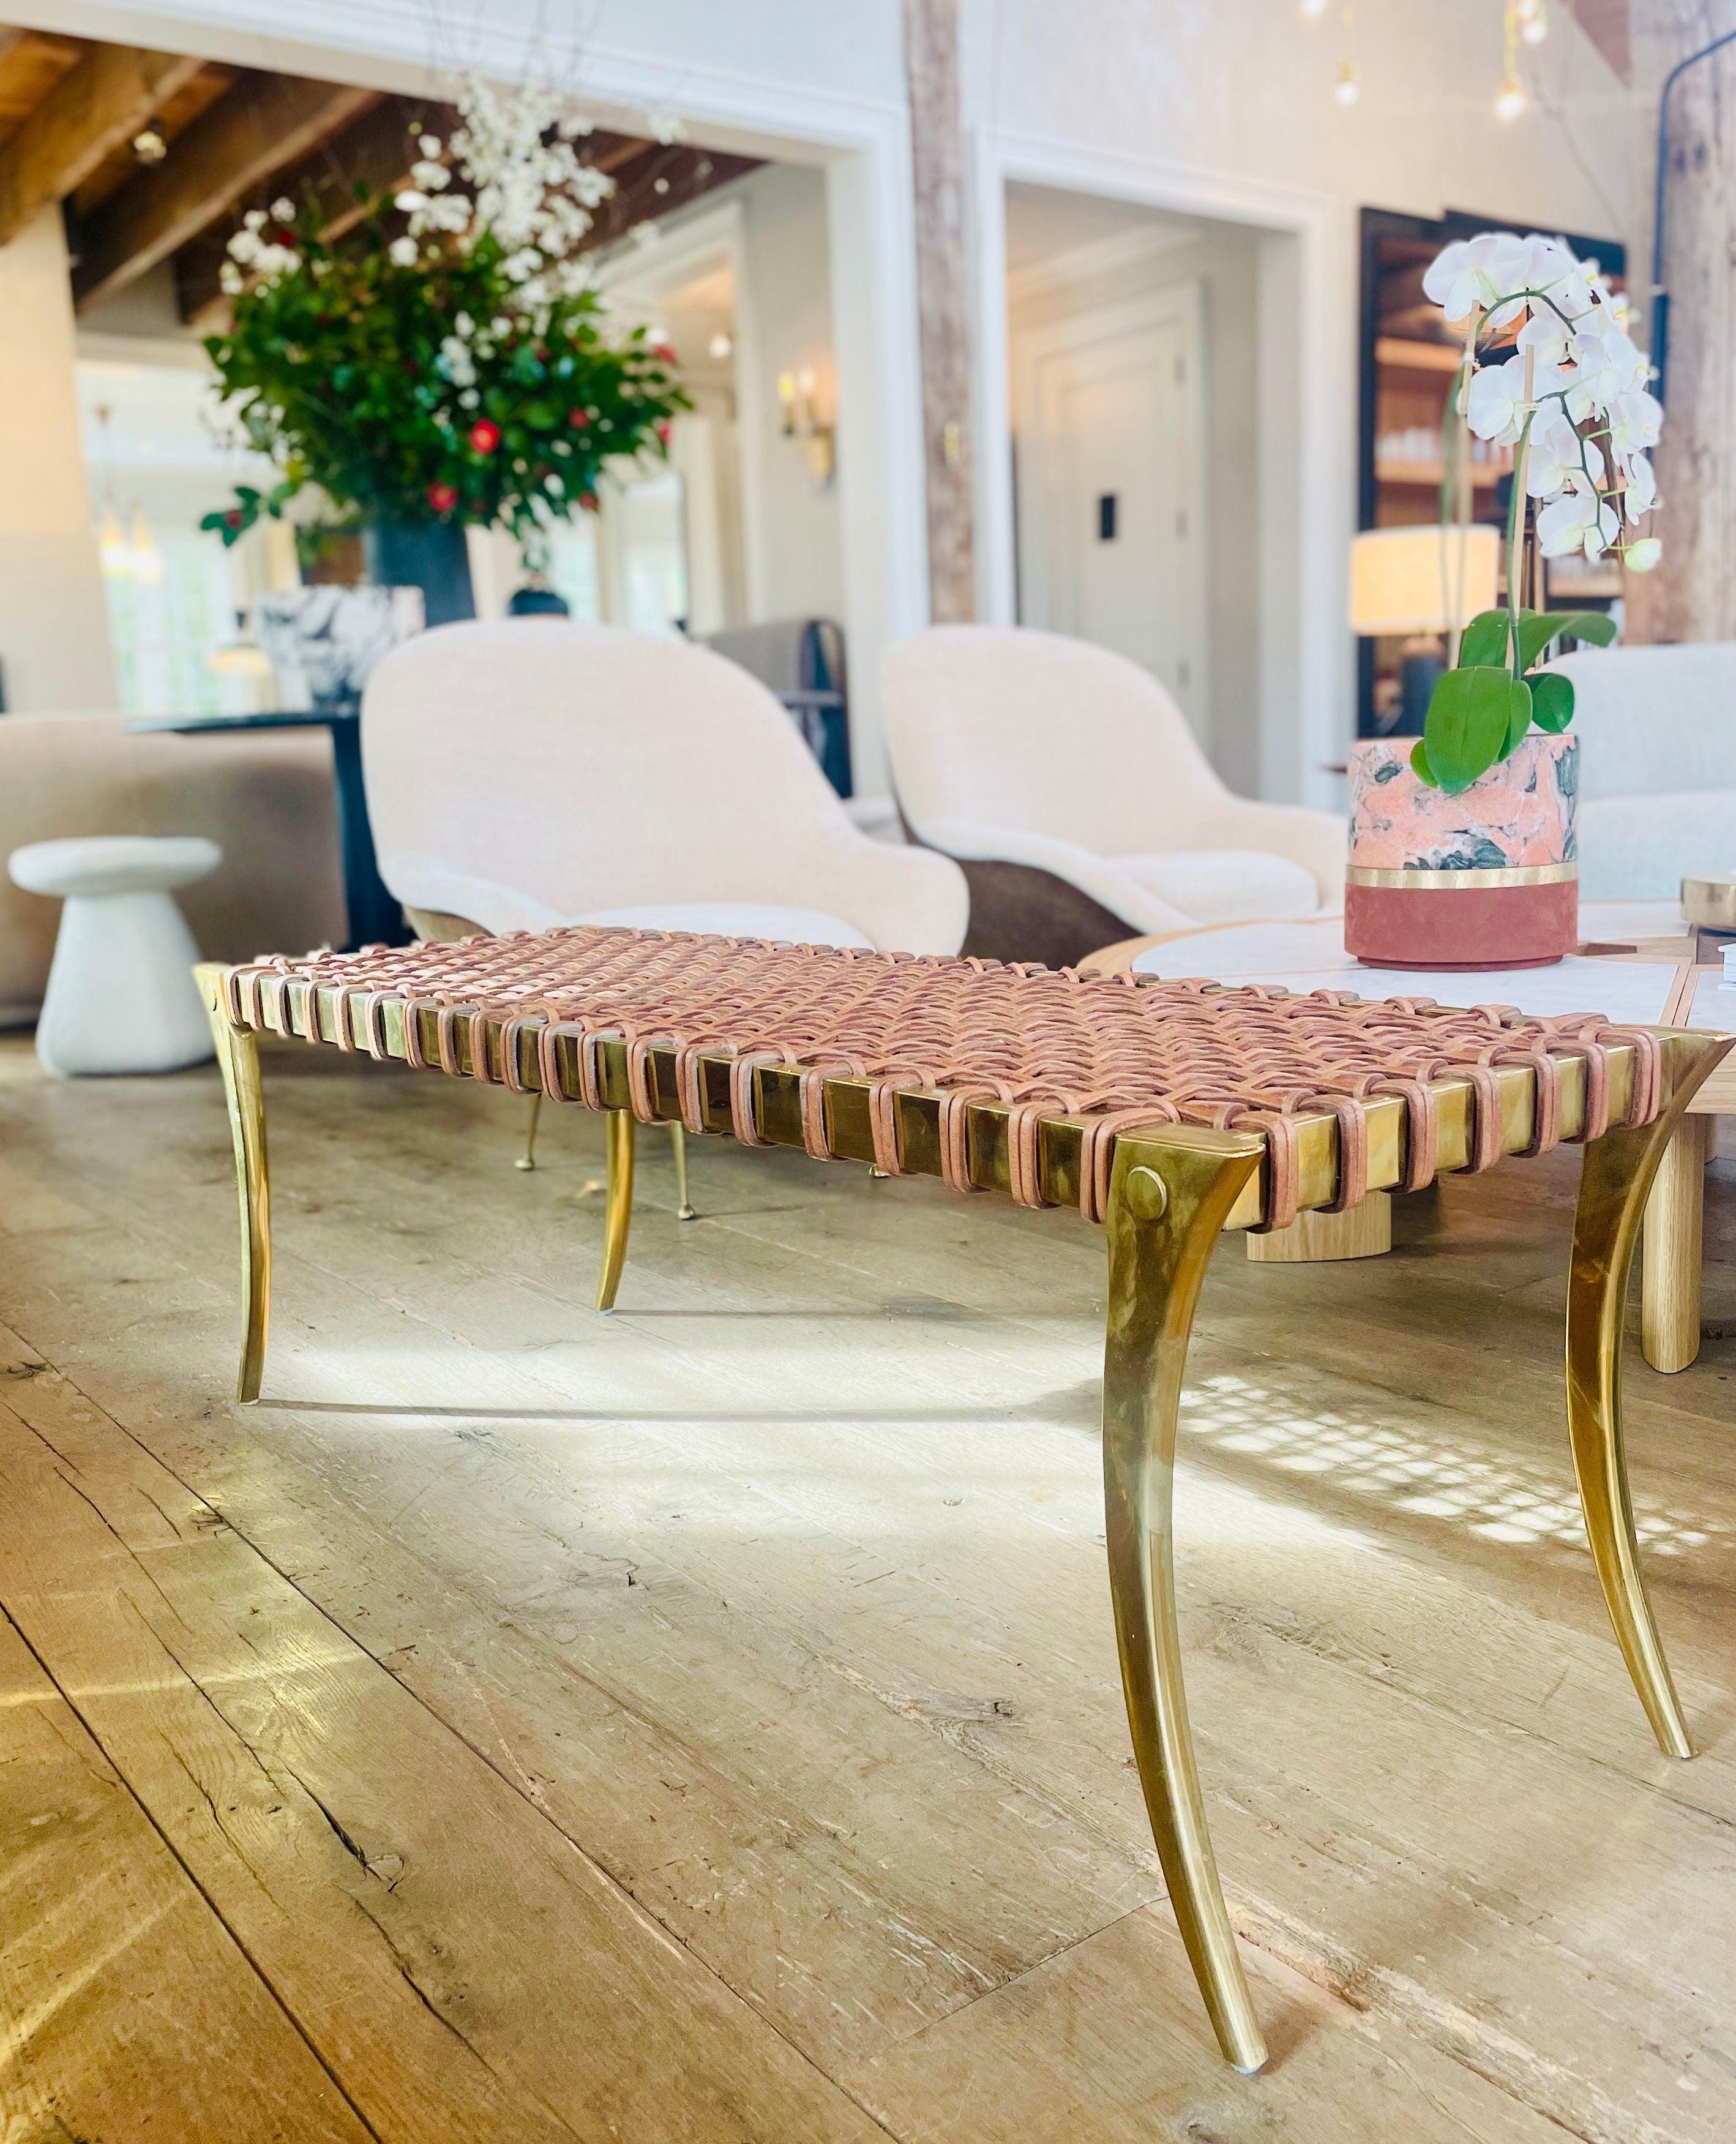 The Klismos Brass Bench is a sophisticated and stylish addition to any home. Crafted from solid cast-brass, the bench has a sleek and timeless design. It features a hand-woven leather strapped seat, adding an elegant finishing touch. Enjoy both